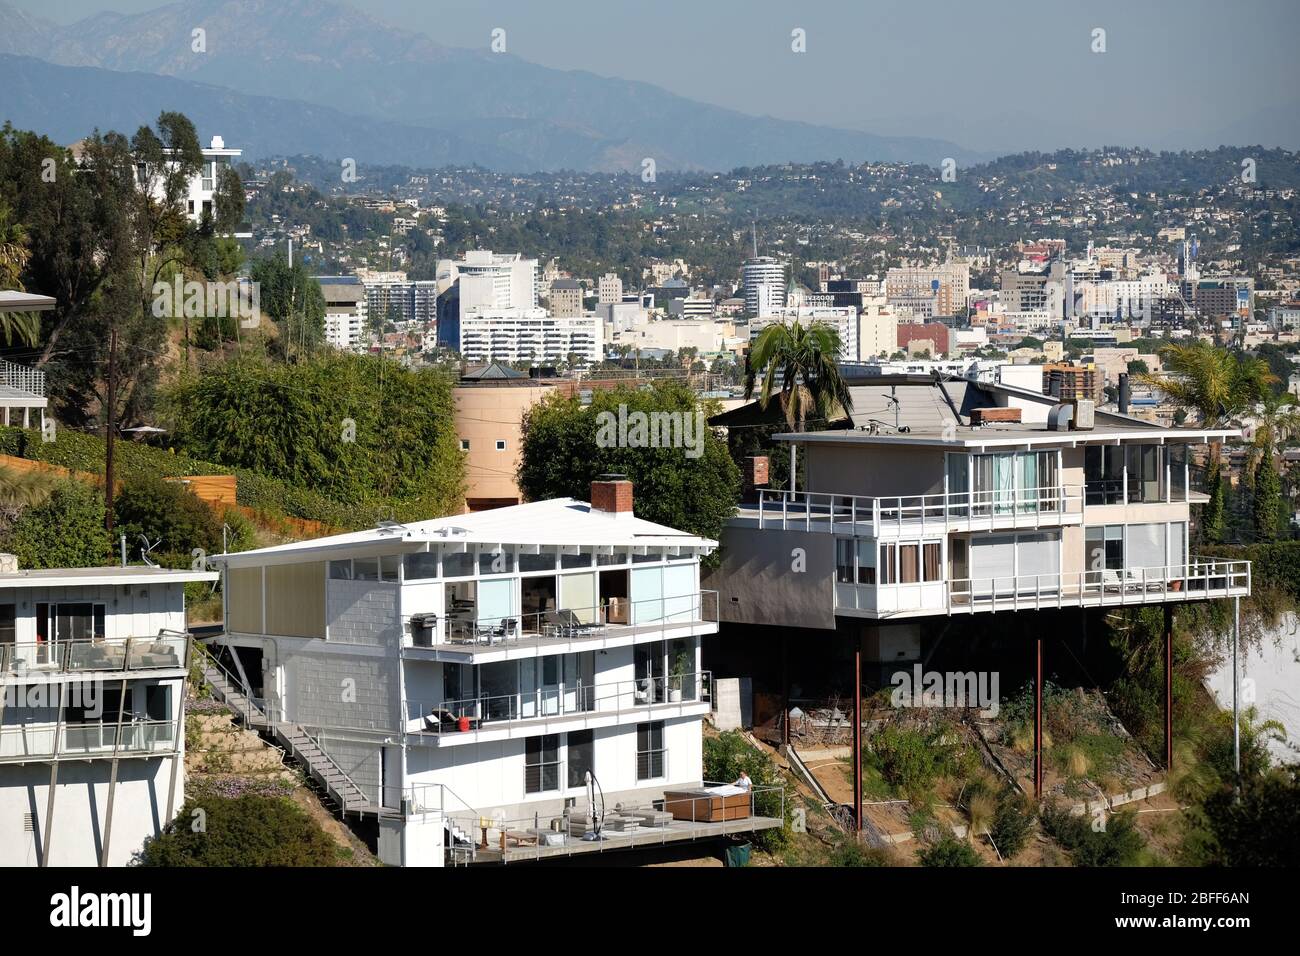 View from the Hollywood Hills to downtown Hollywood with homes on steep hillside in Los Angeles, California Stock Photo